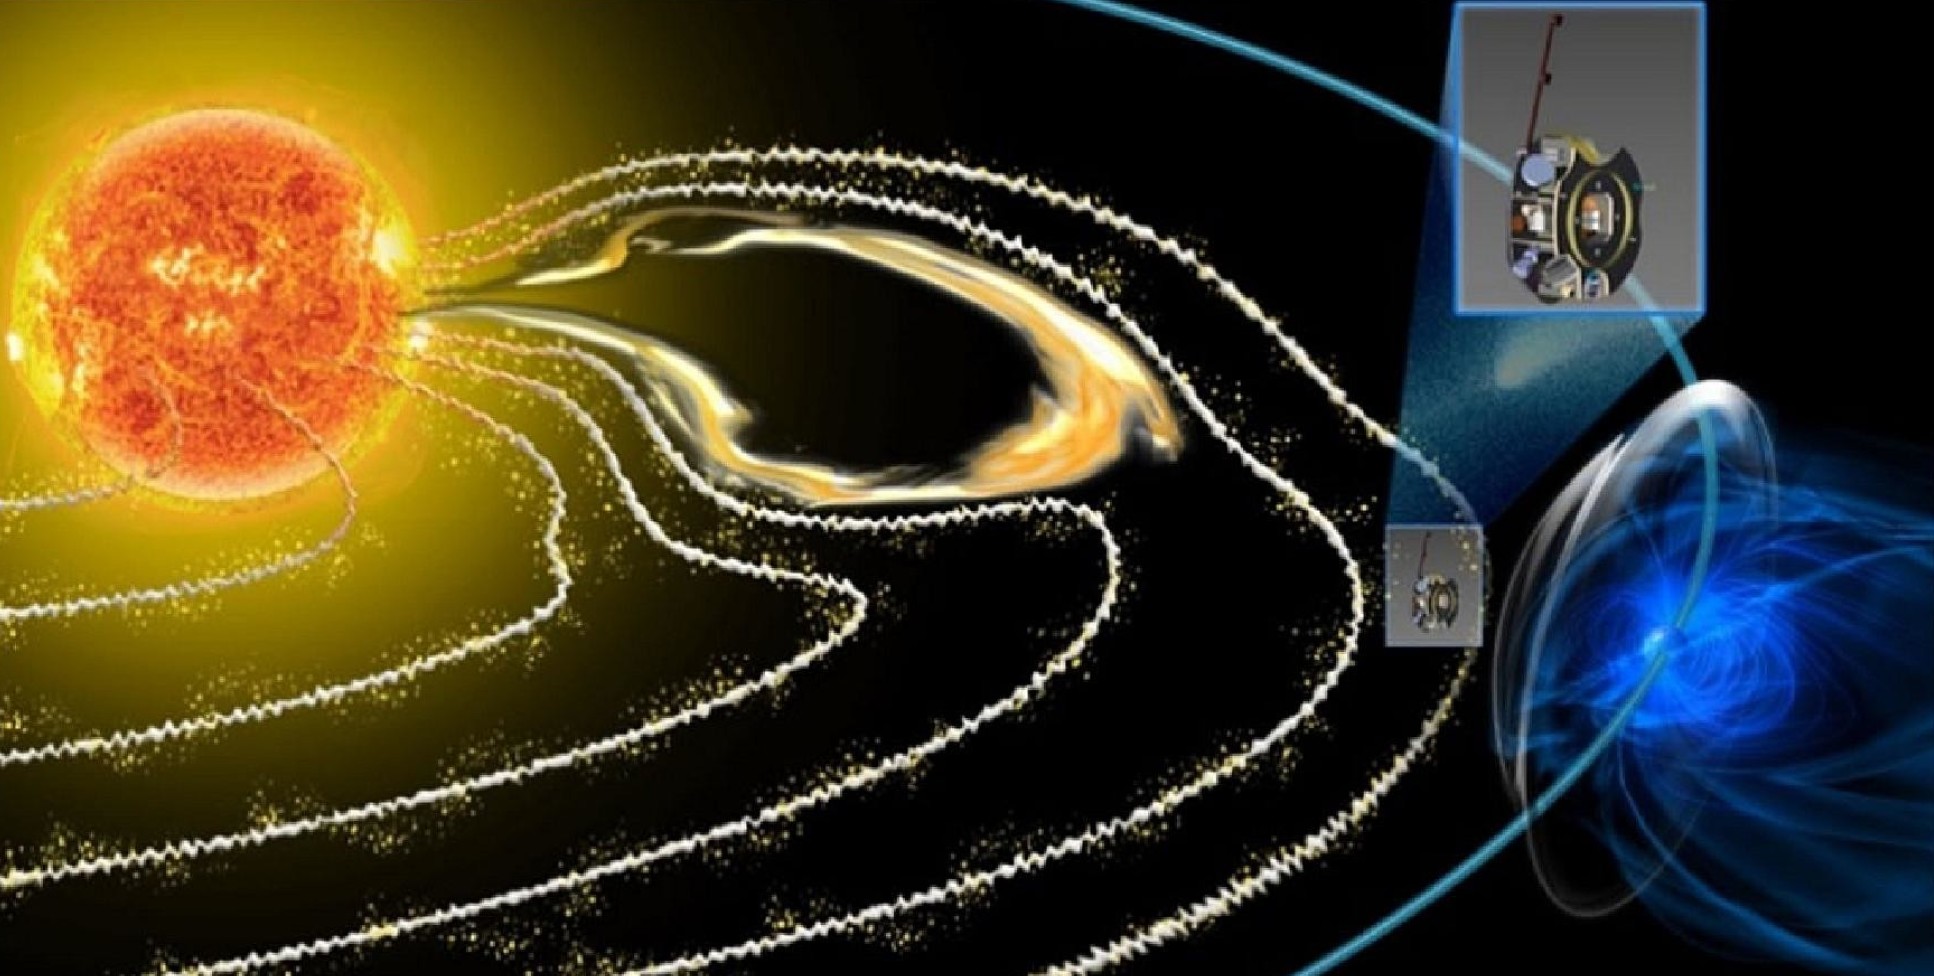 Illustration of bands of energy coming from the sun, interacting with the spacecraft positioned near the Earth